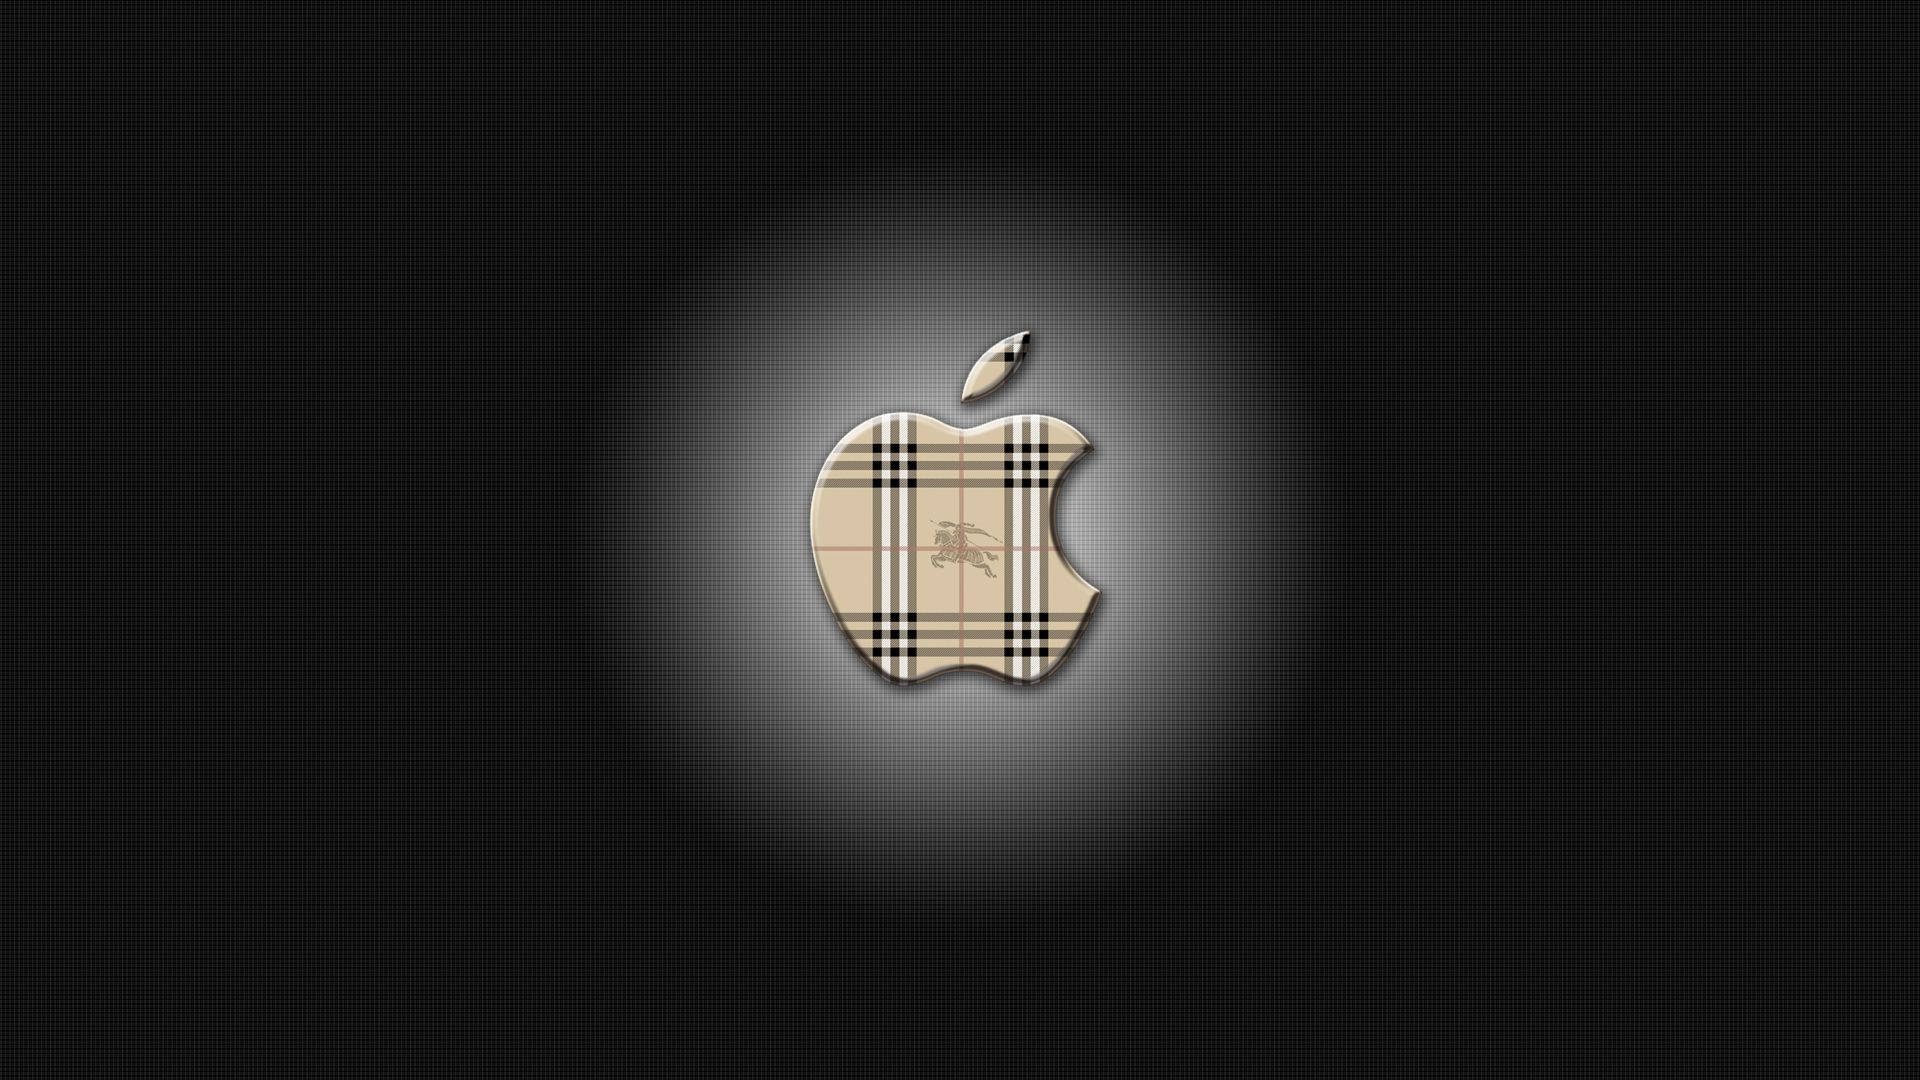 Burberry Wallpapers